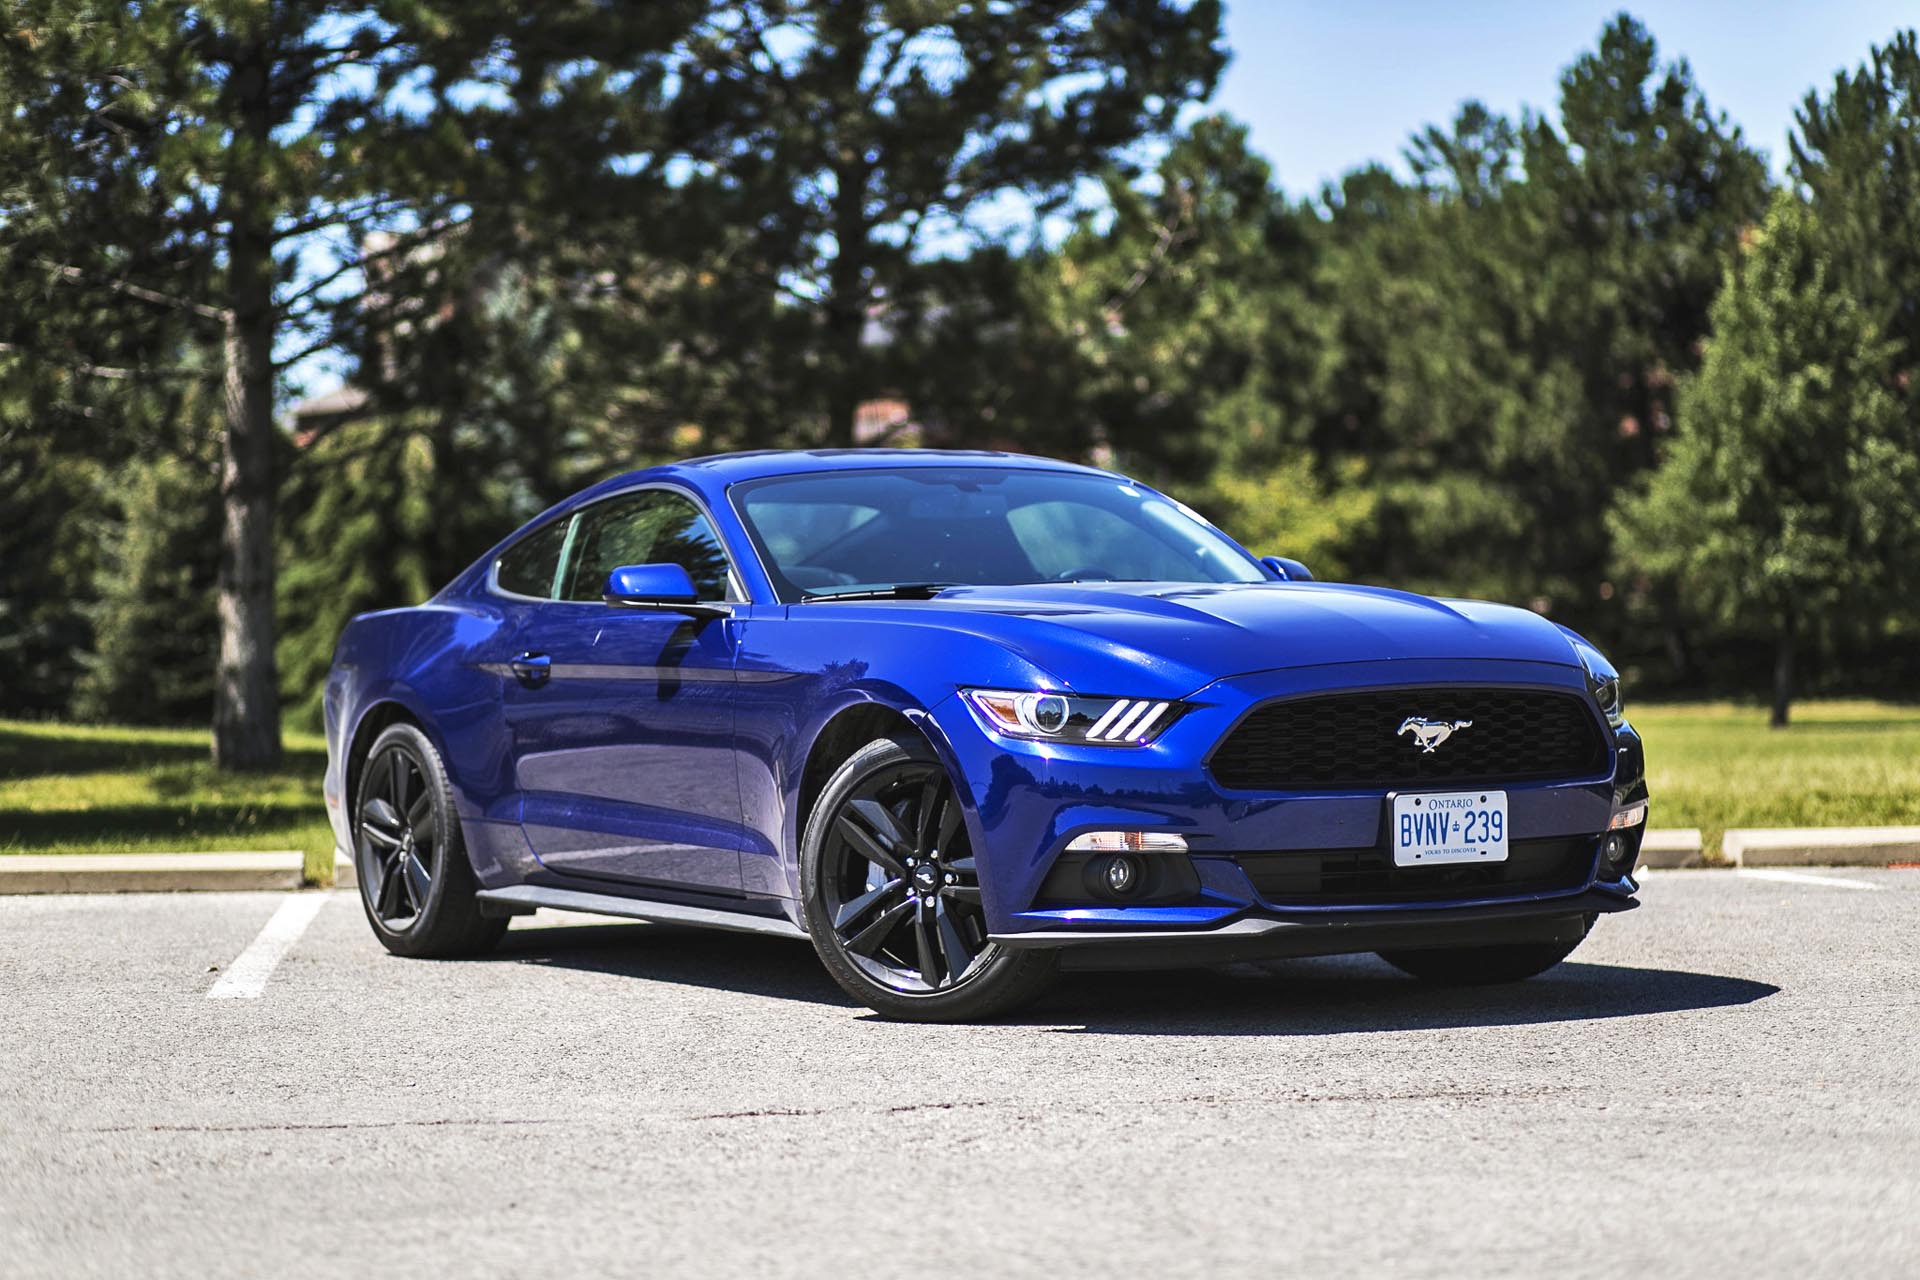 2015 ford mustang ecoboost